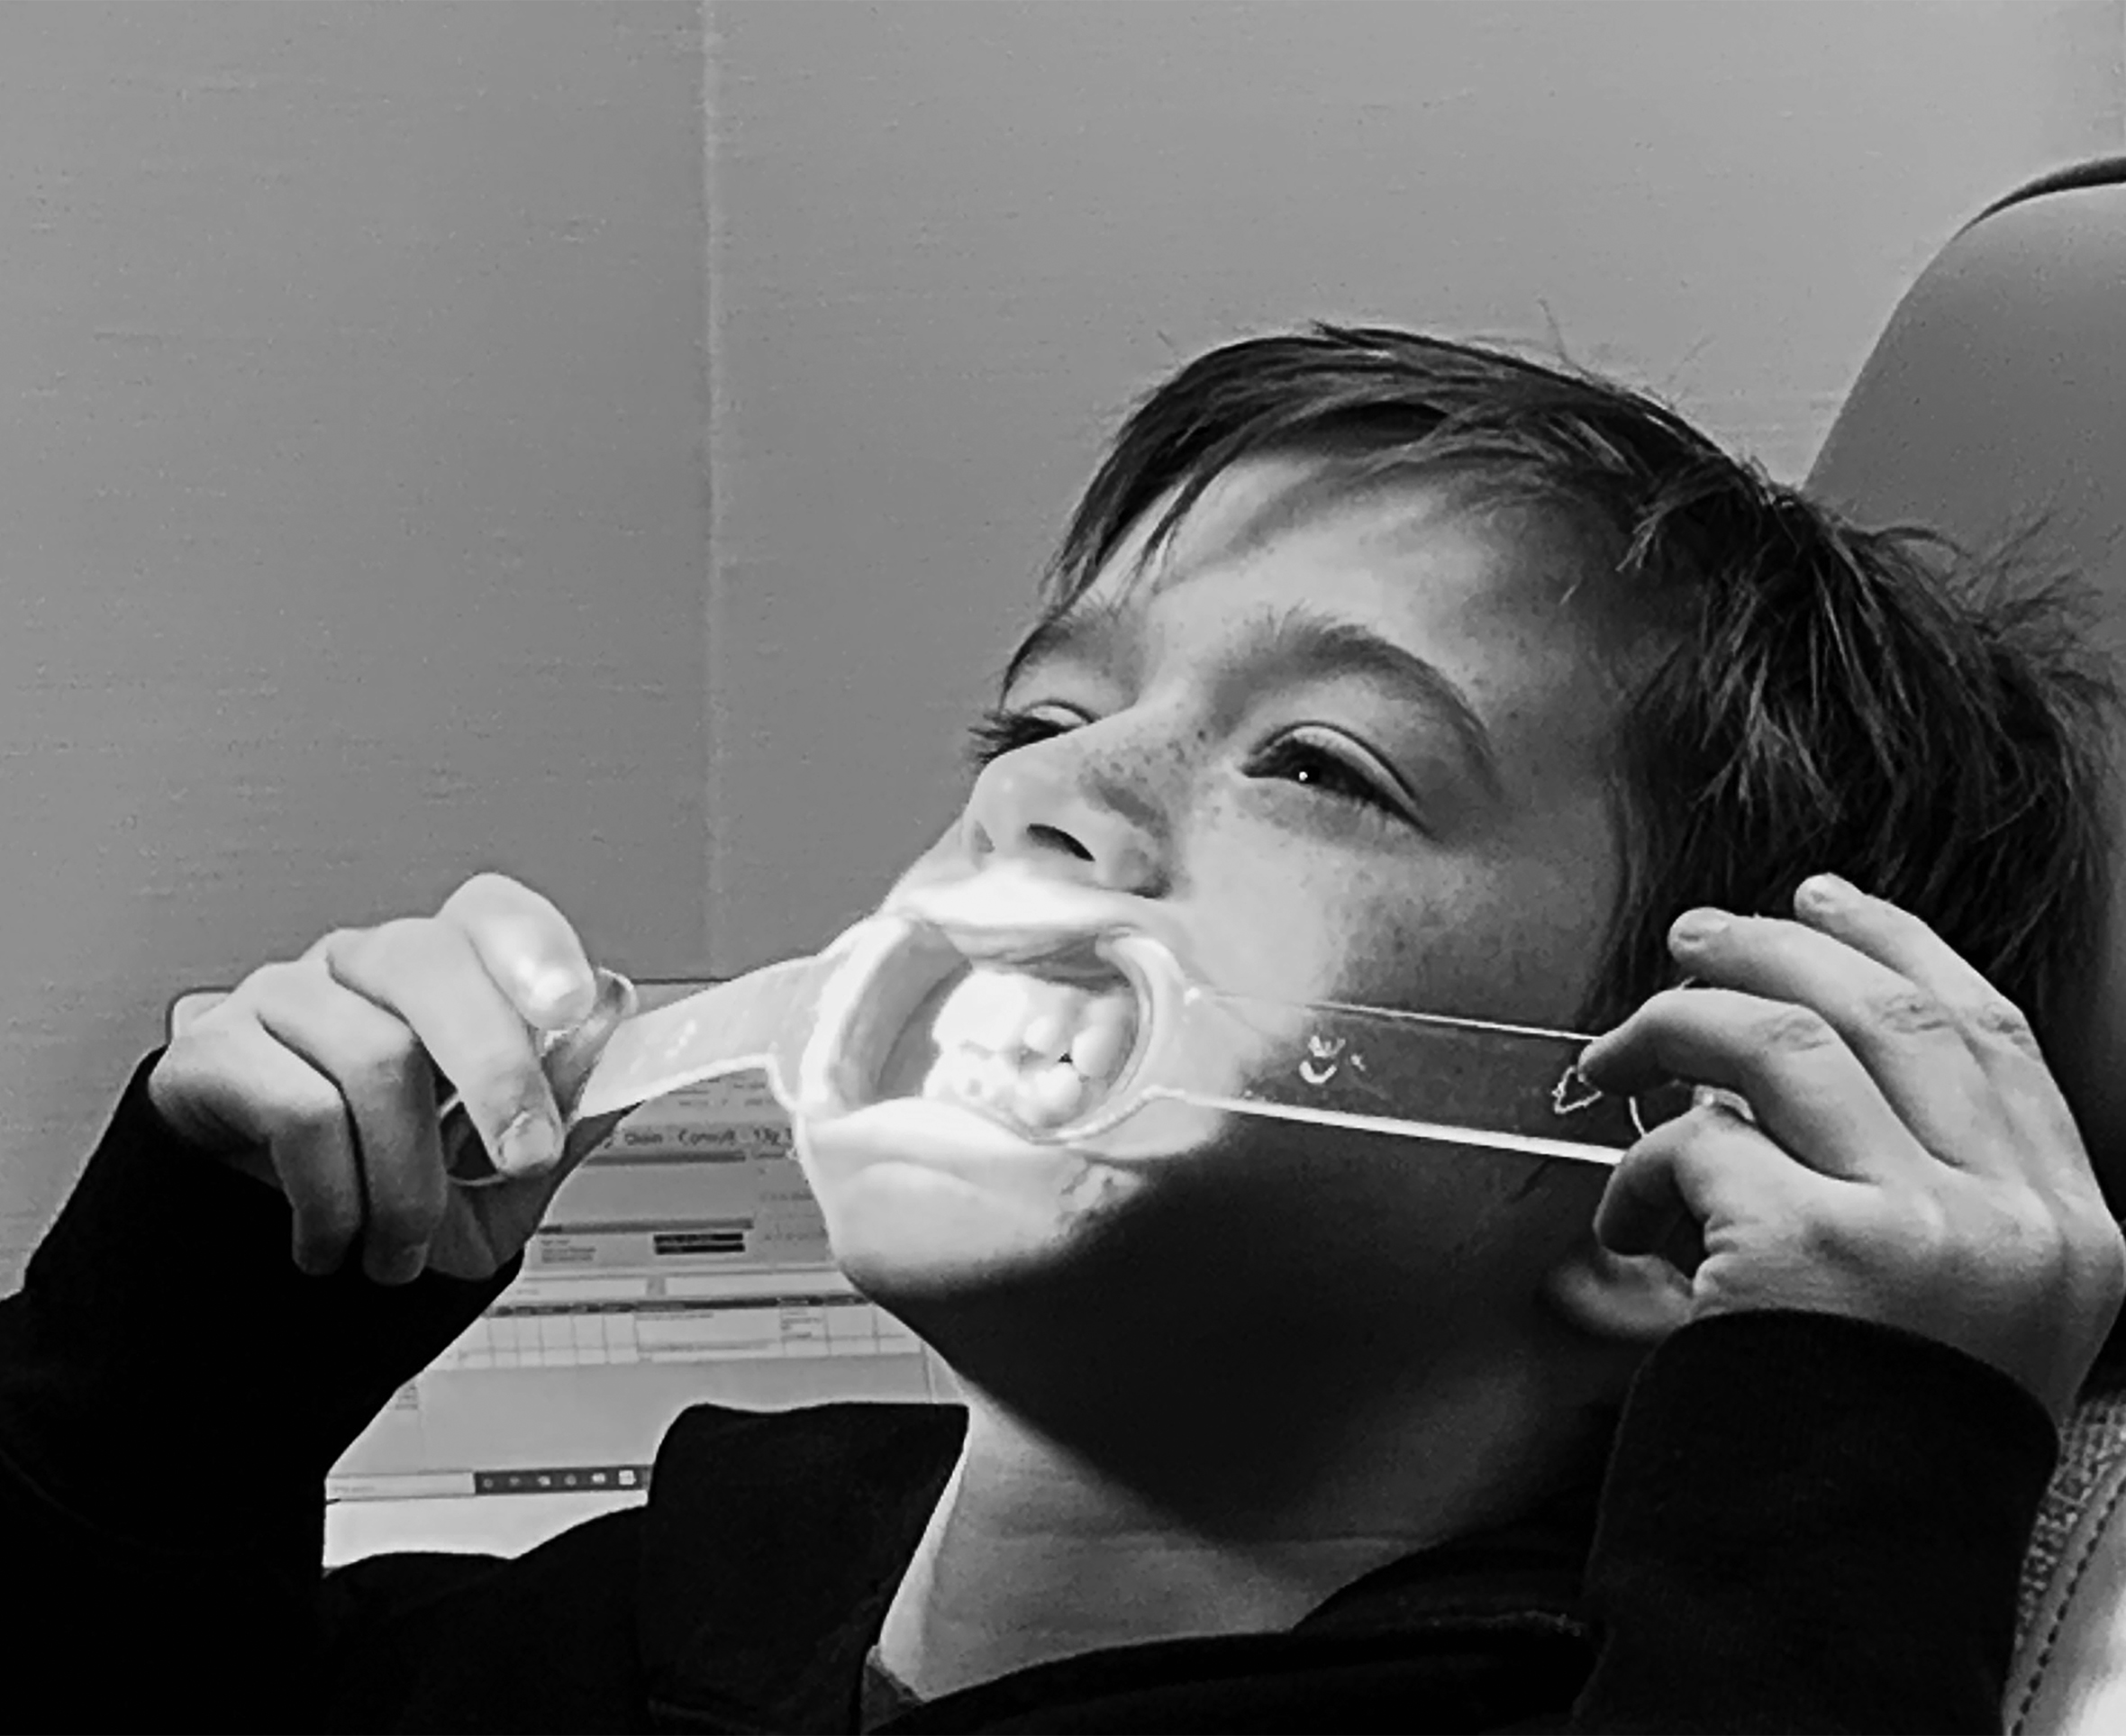 A close-up of a young boy with freckles in a dentist chair. He has a dental mouth opener in his mouth and is holding the sides with his hands.